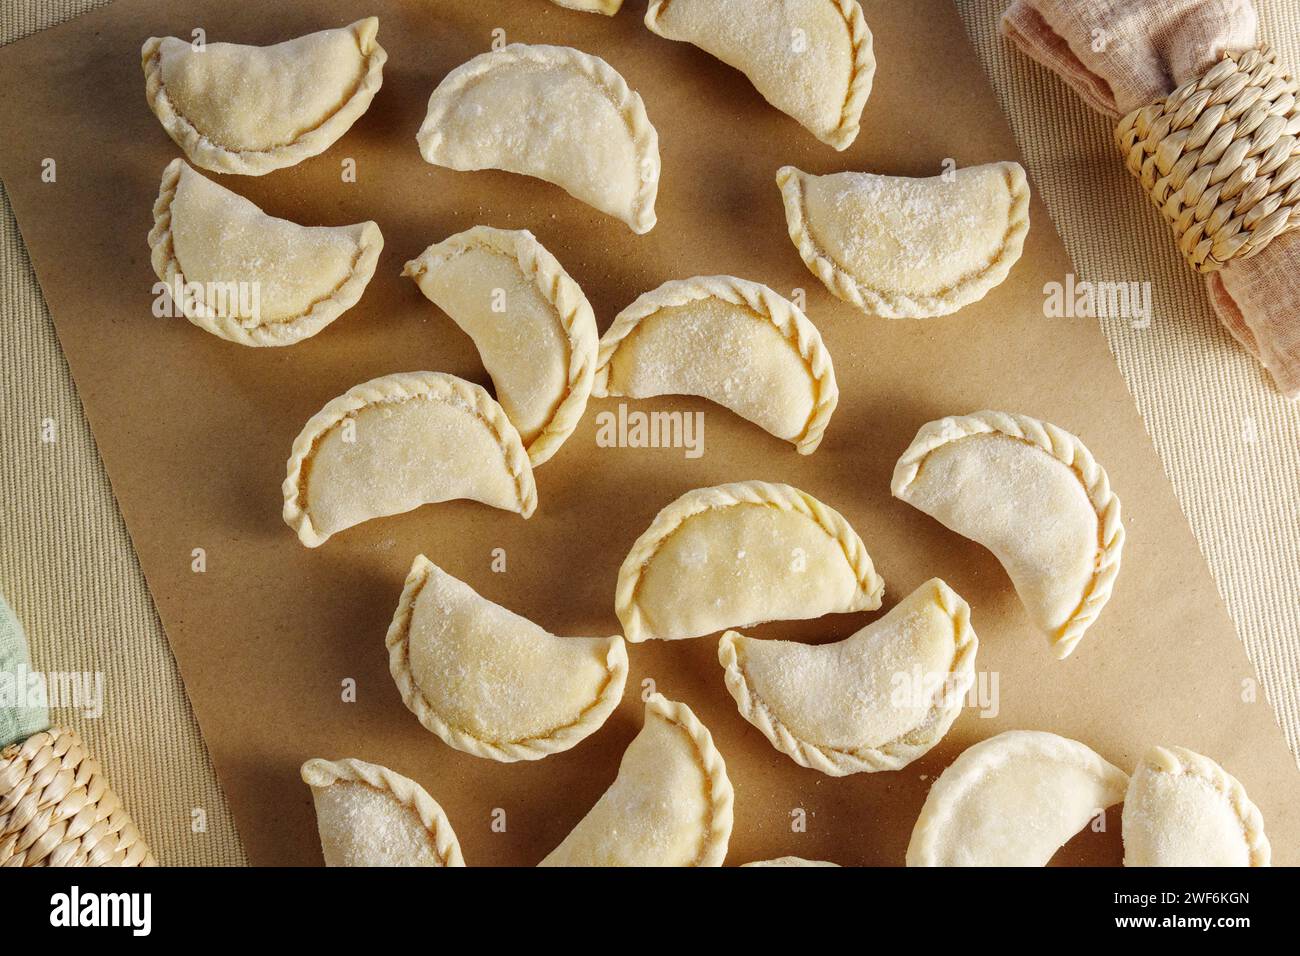 Variety of beautifully crafted dumplings artfully assembled on a wooden cutting board Stock Photo